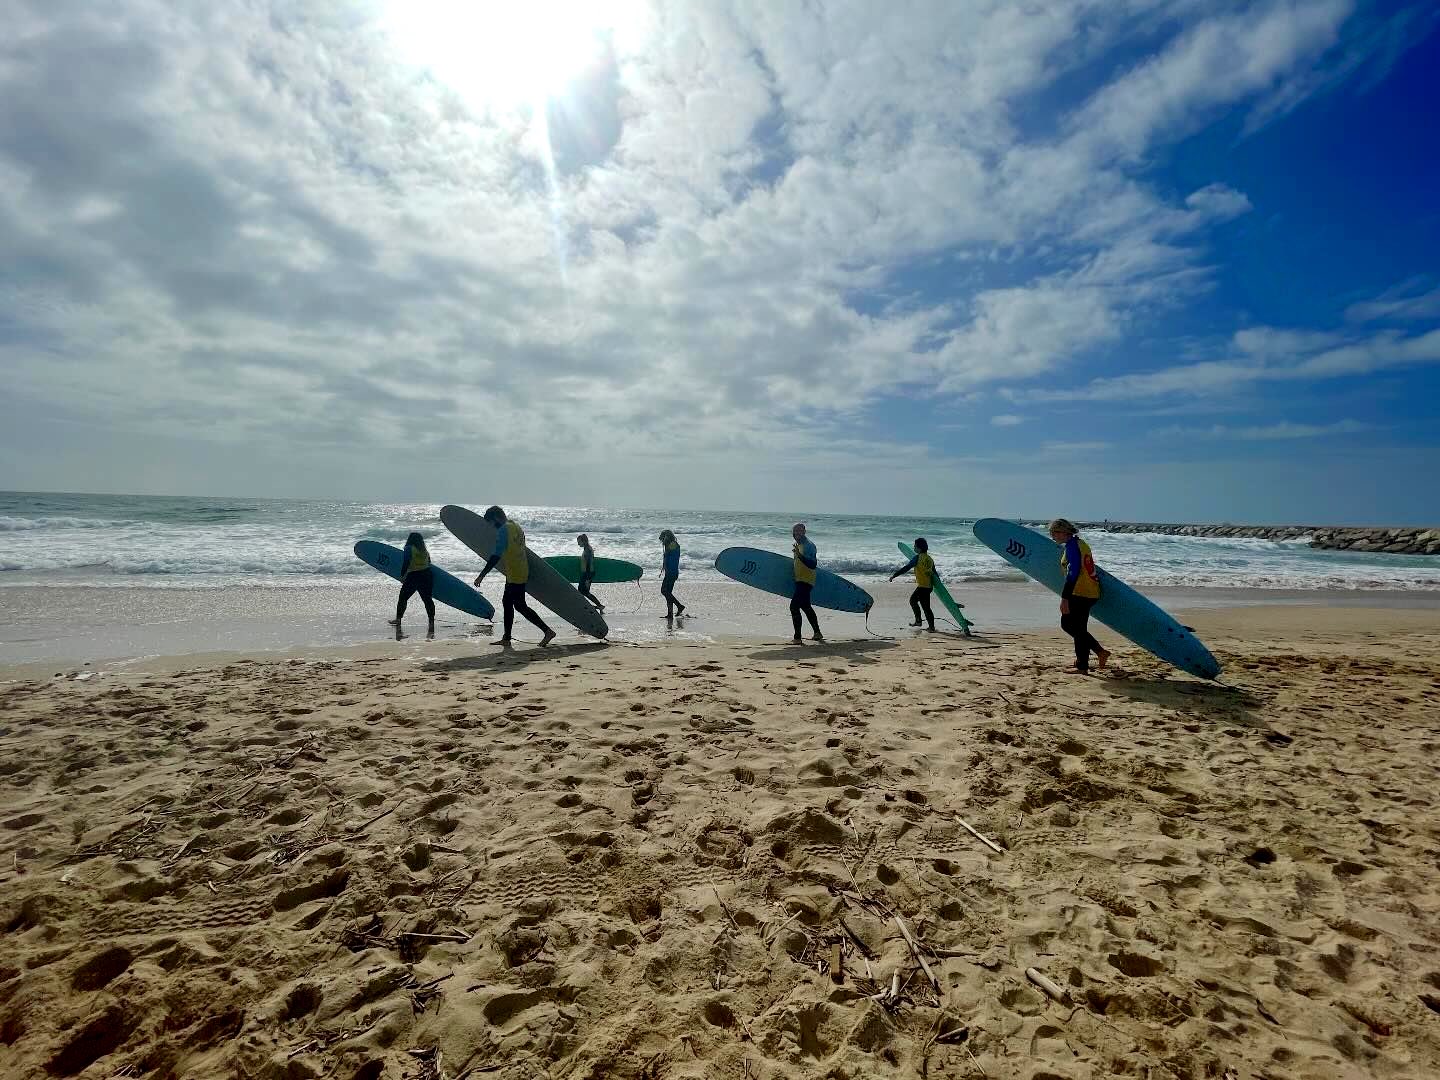 A group of primehammer members walk on a Lisbon beach carrying surf boards under a blue sky.